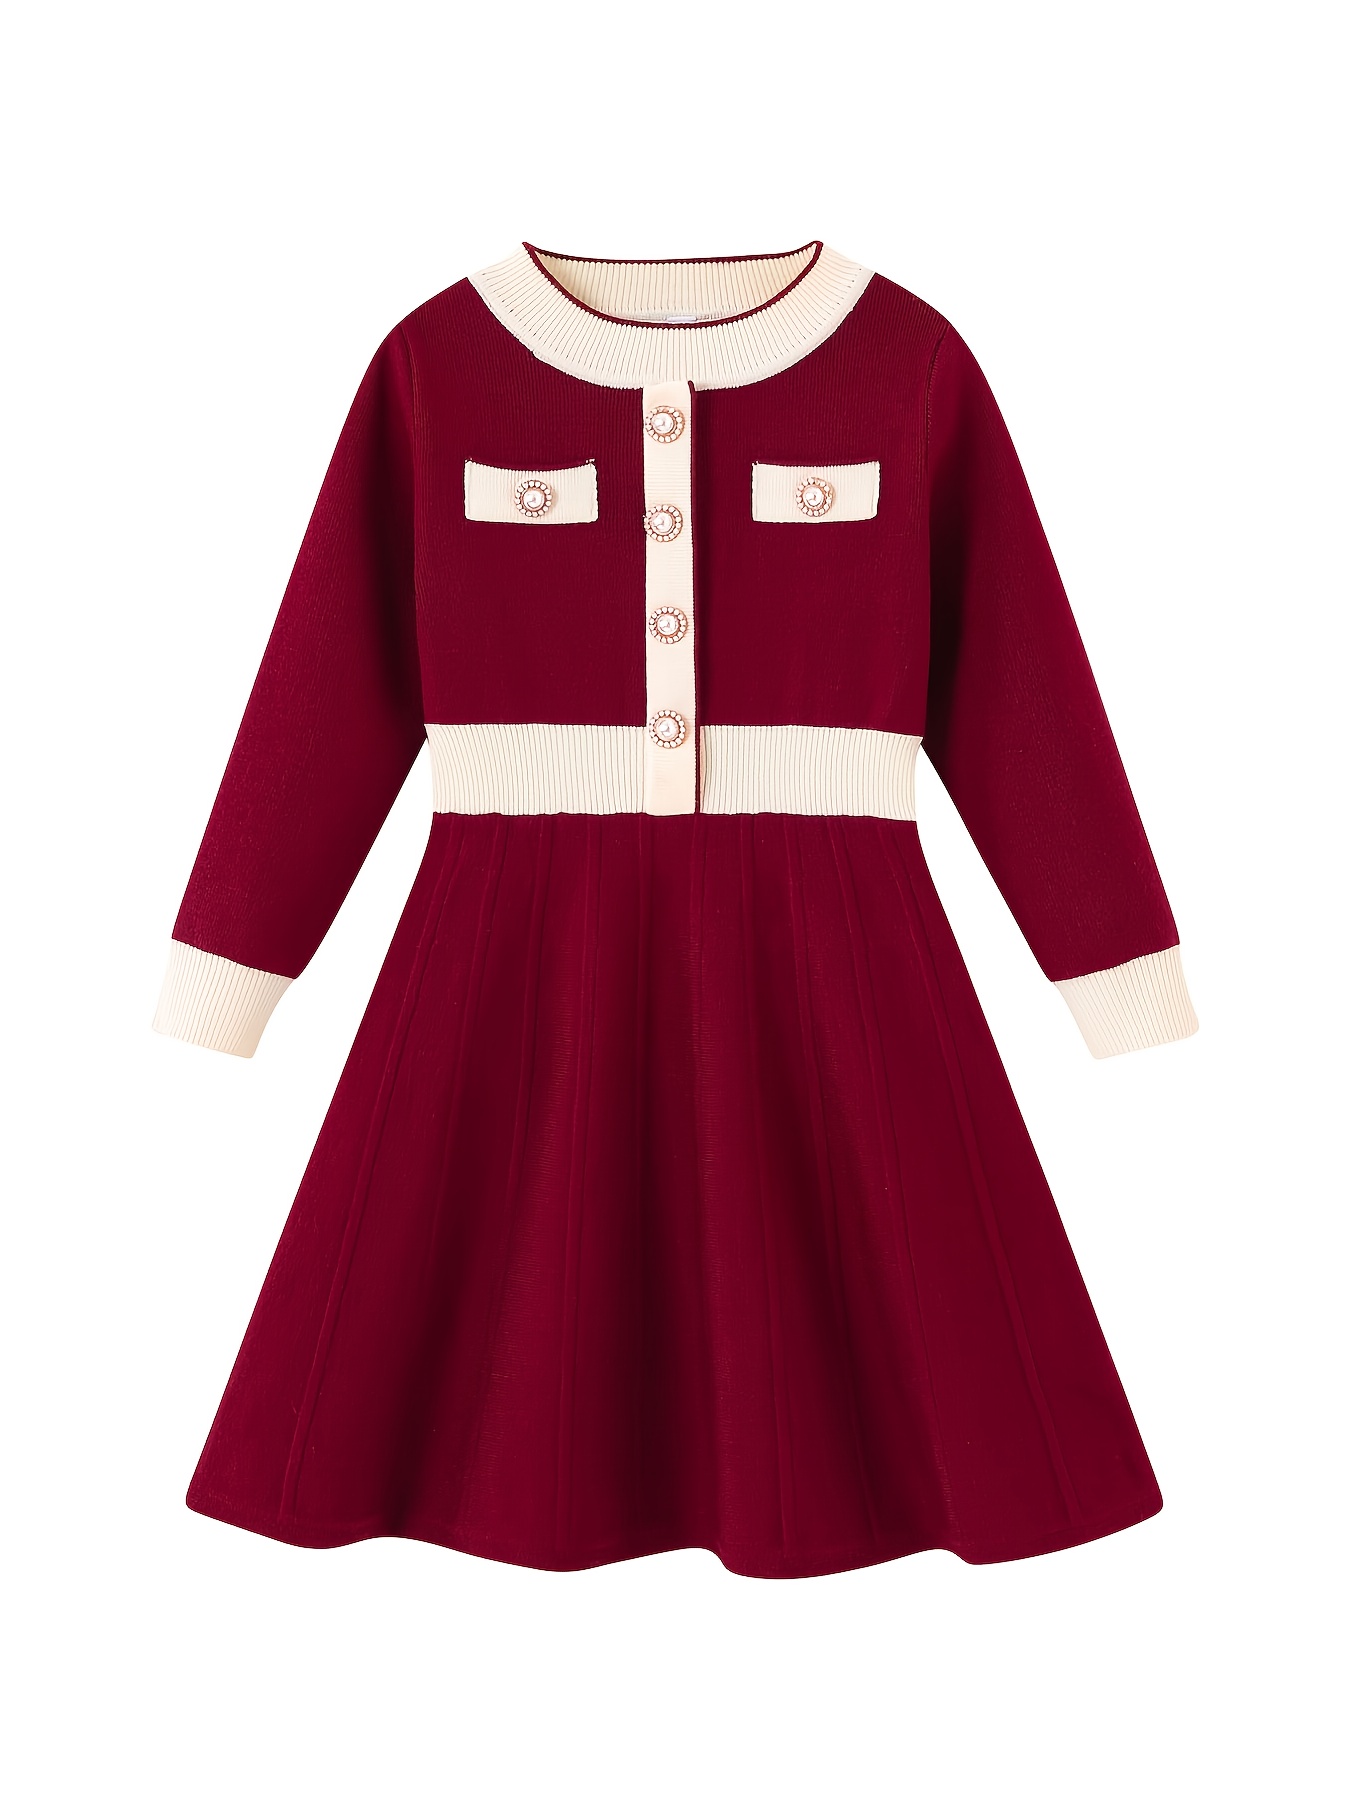 Girls Vintage Casual Knitted Thermal Dress For Winter Christmas Party